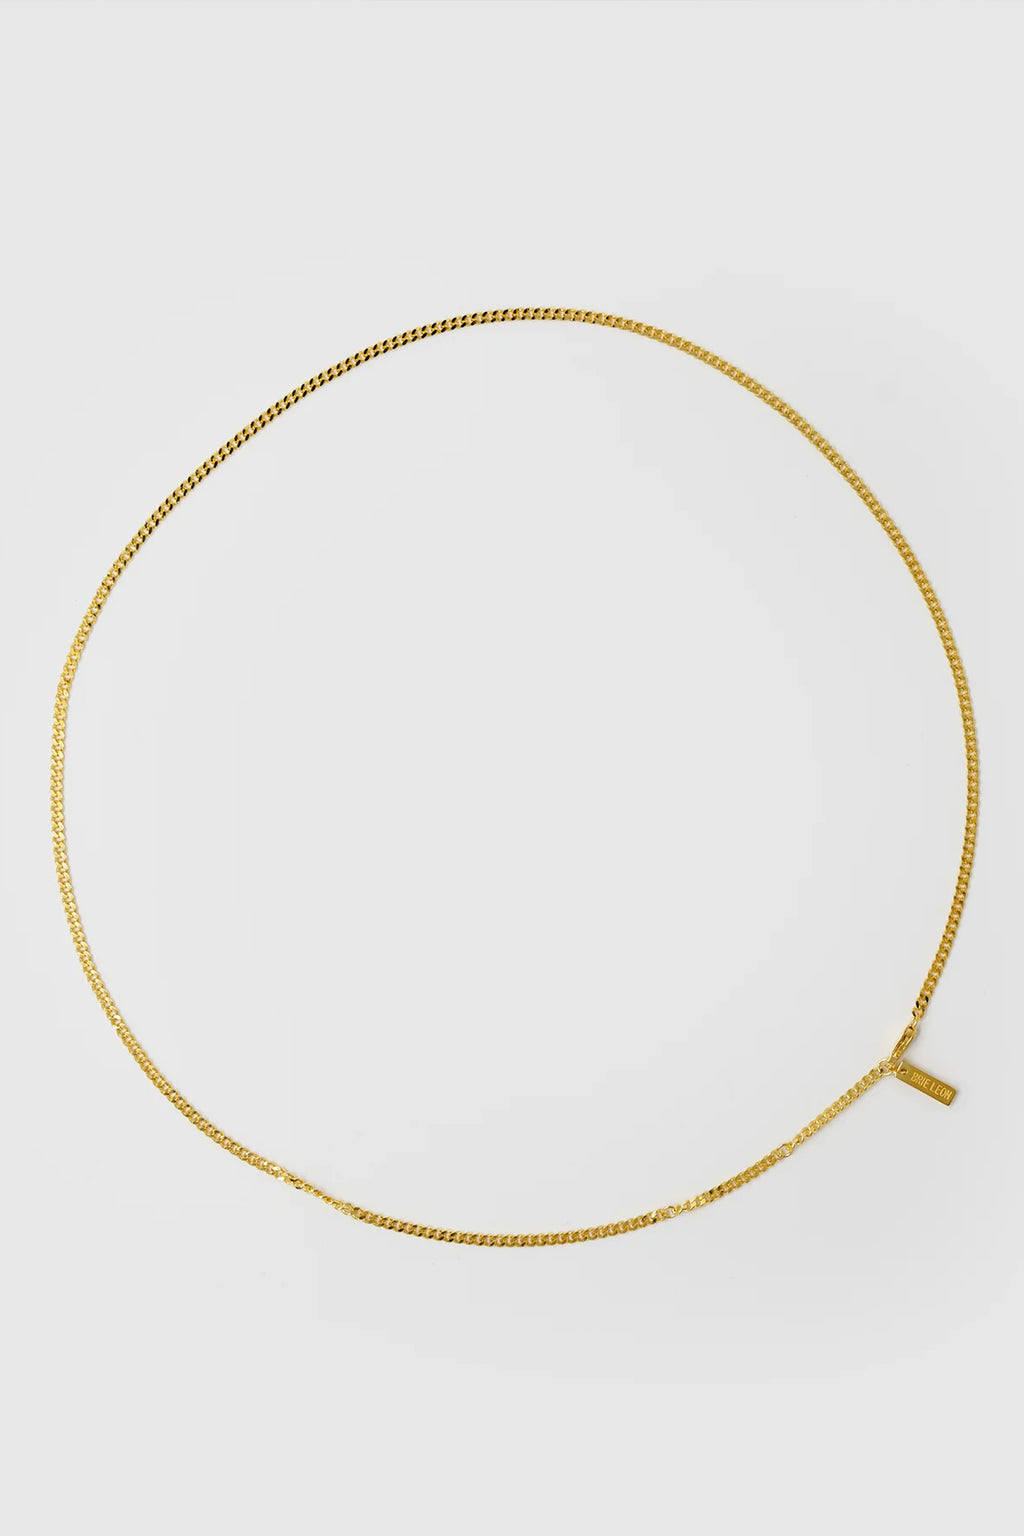 Brie Leon - Curb Chain Necklace - Gold